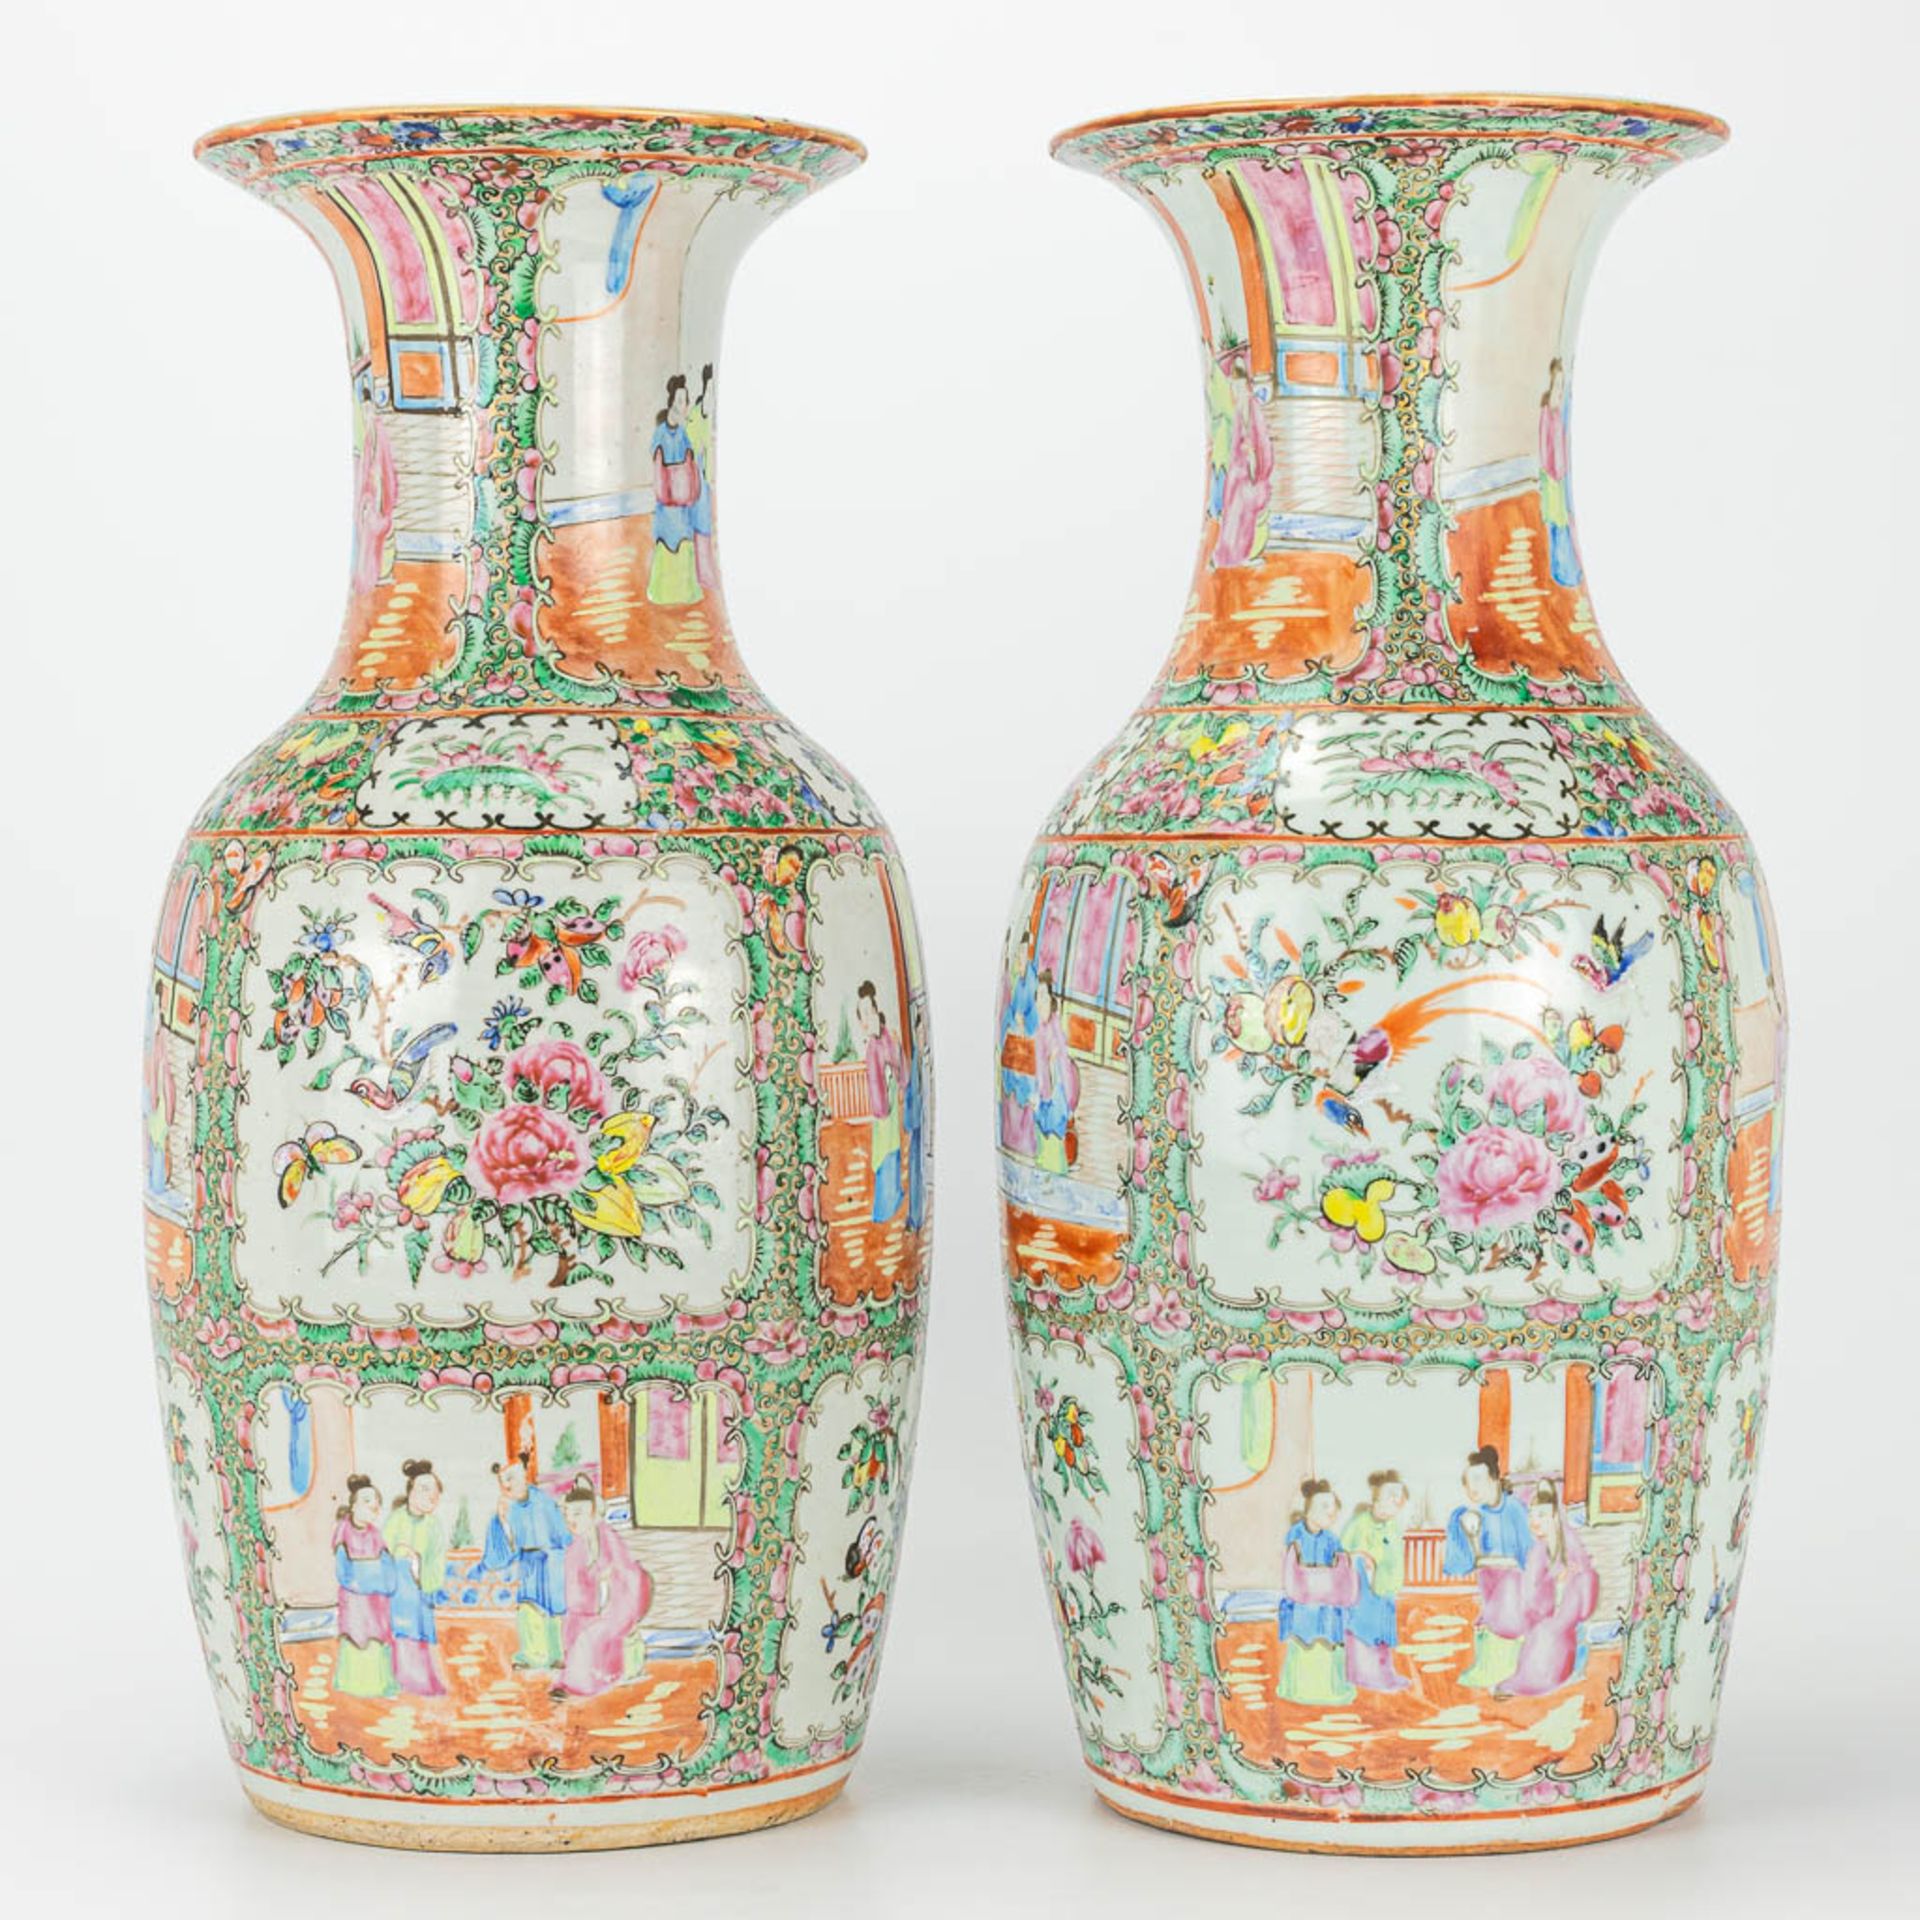 A pair of vases made of Chinese porcelain in Canton style. 19th century. - Image 13 of 17